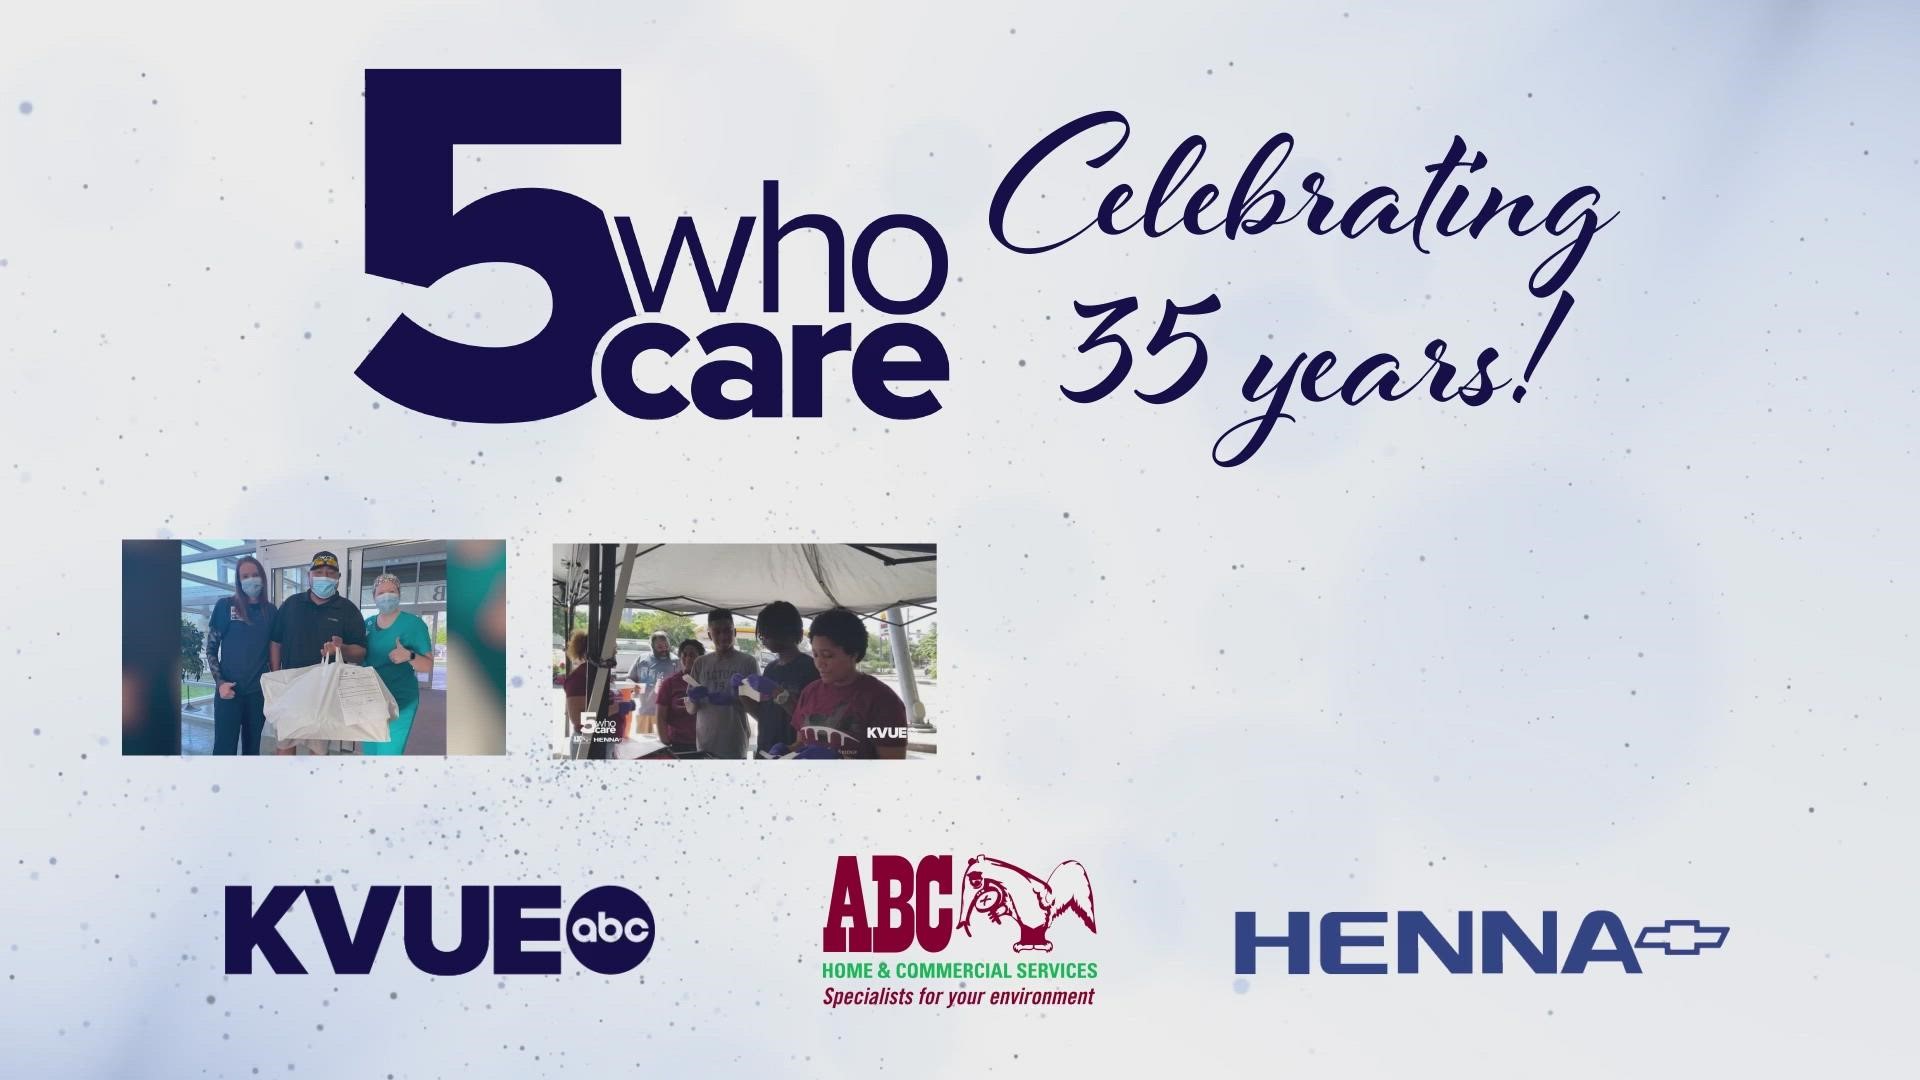 For the 35th annual 5 Who Care awards, KVUE along with partners ABC Home and Commercial Services and Henna Chevrolet, will honor 5 people who go above and beyond.